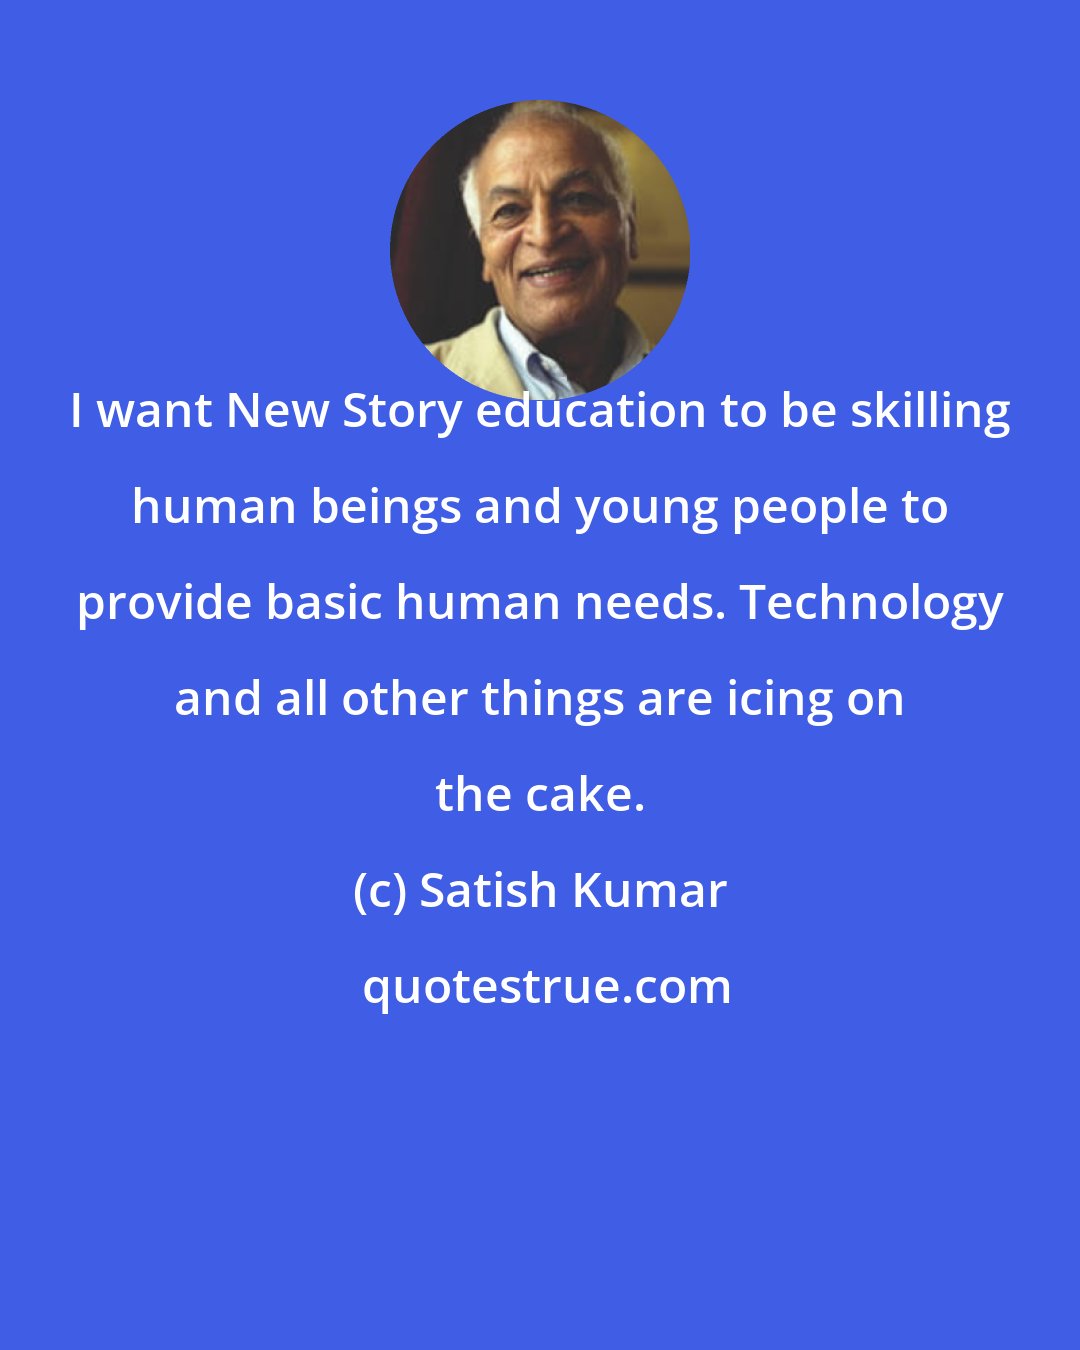 Satish Kumar: I want New Story education to be skilling human beings and young people to provide basic human needs. Technology and all other things are icing on the cake.